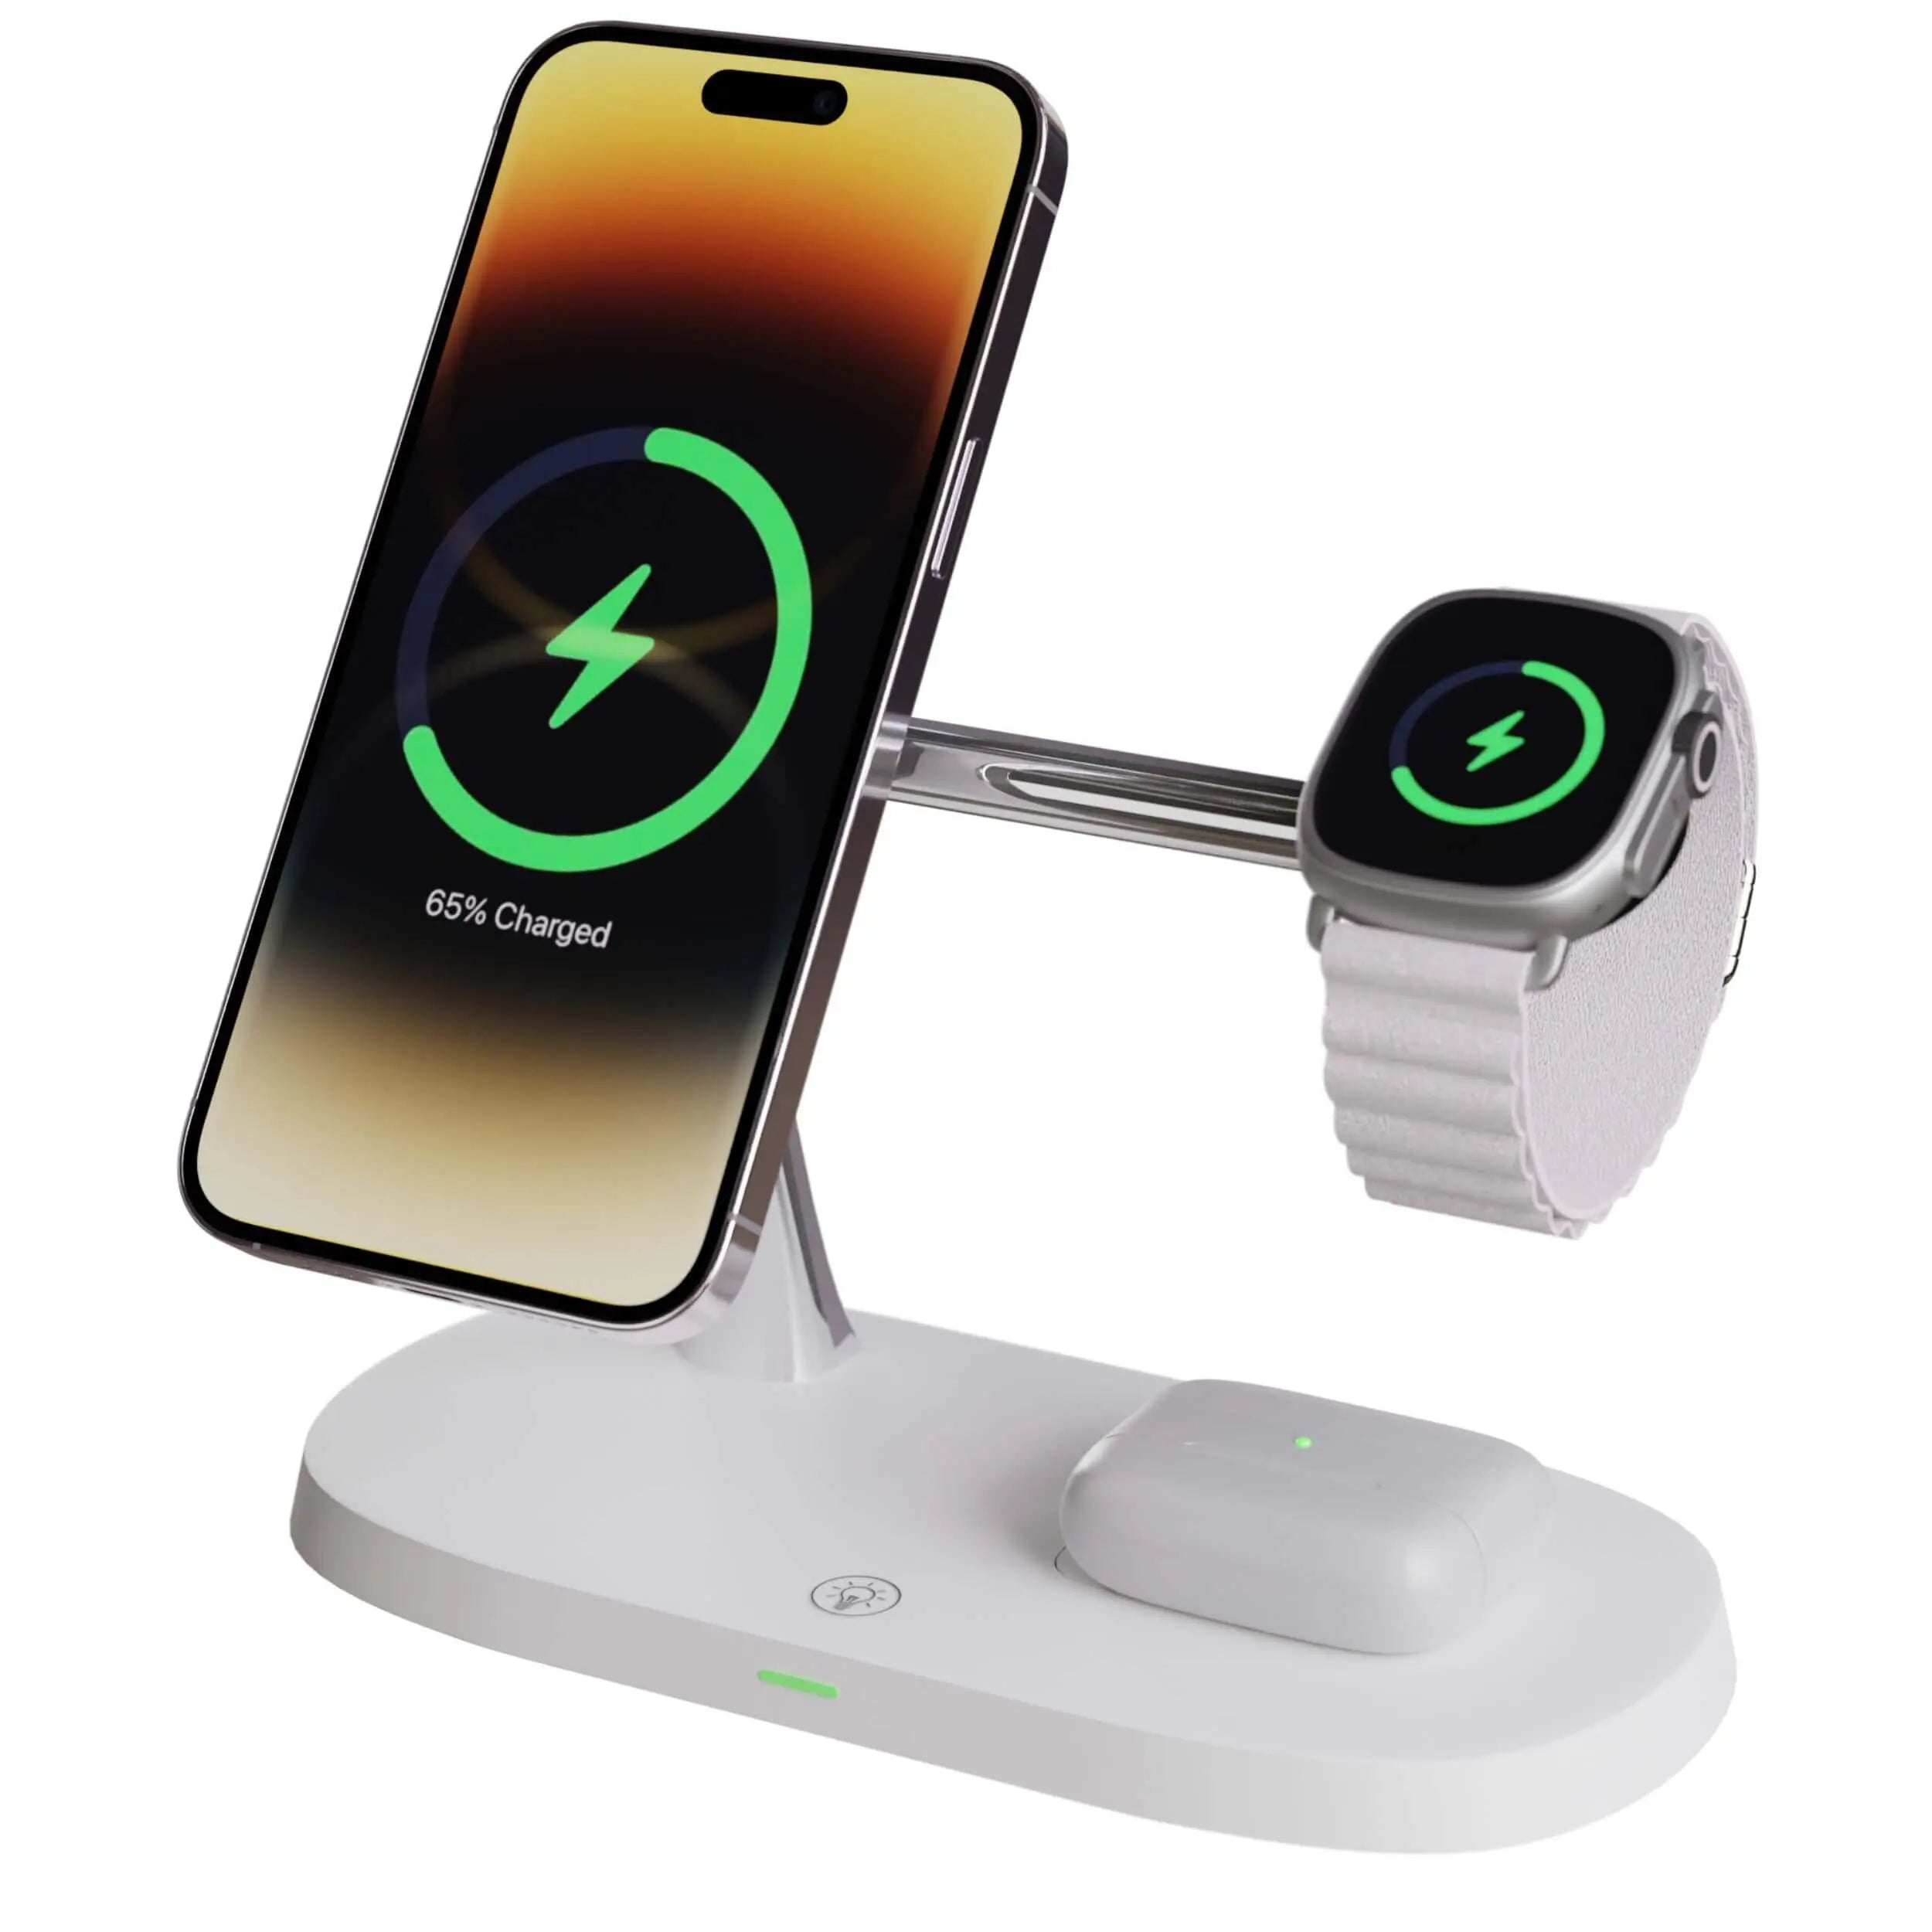 3 in 1 MagSafe Wireless Charger for iPhone 14 Pro Max, Apple Watch Series 8, and Apple AirPods Pro 2